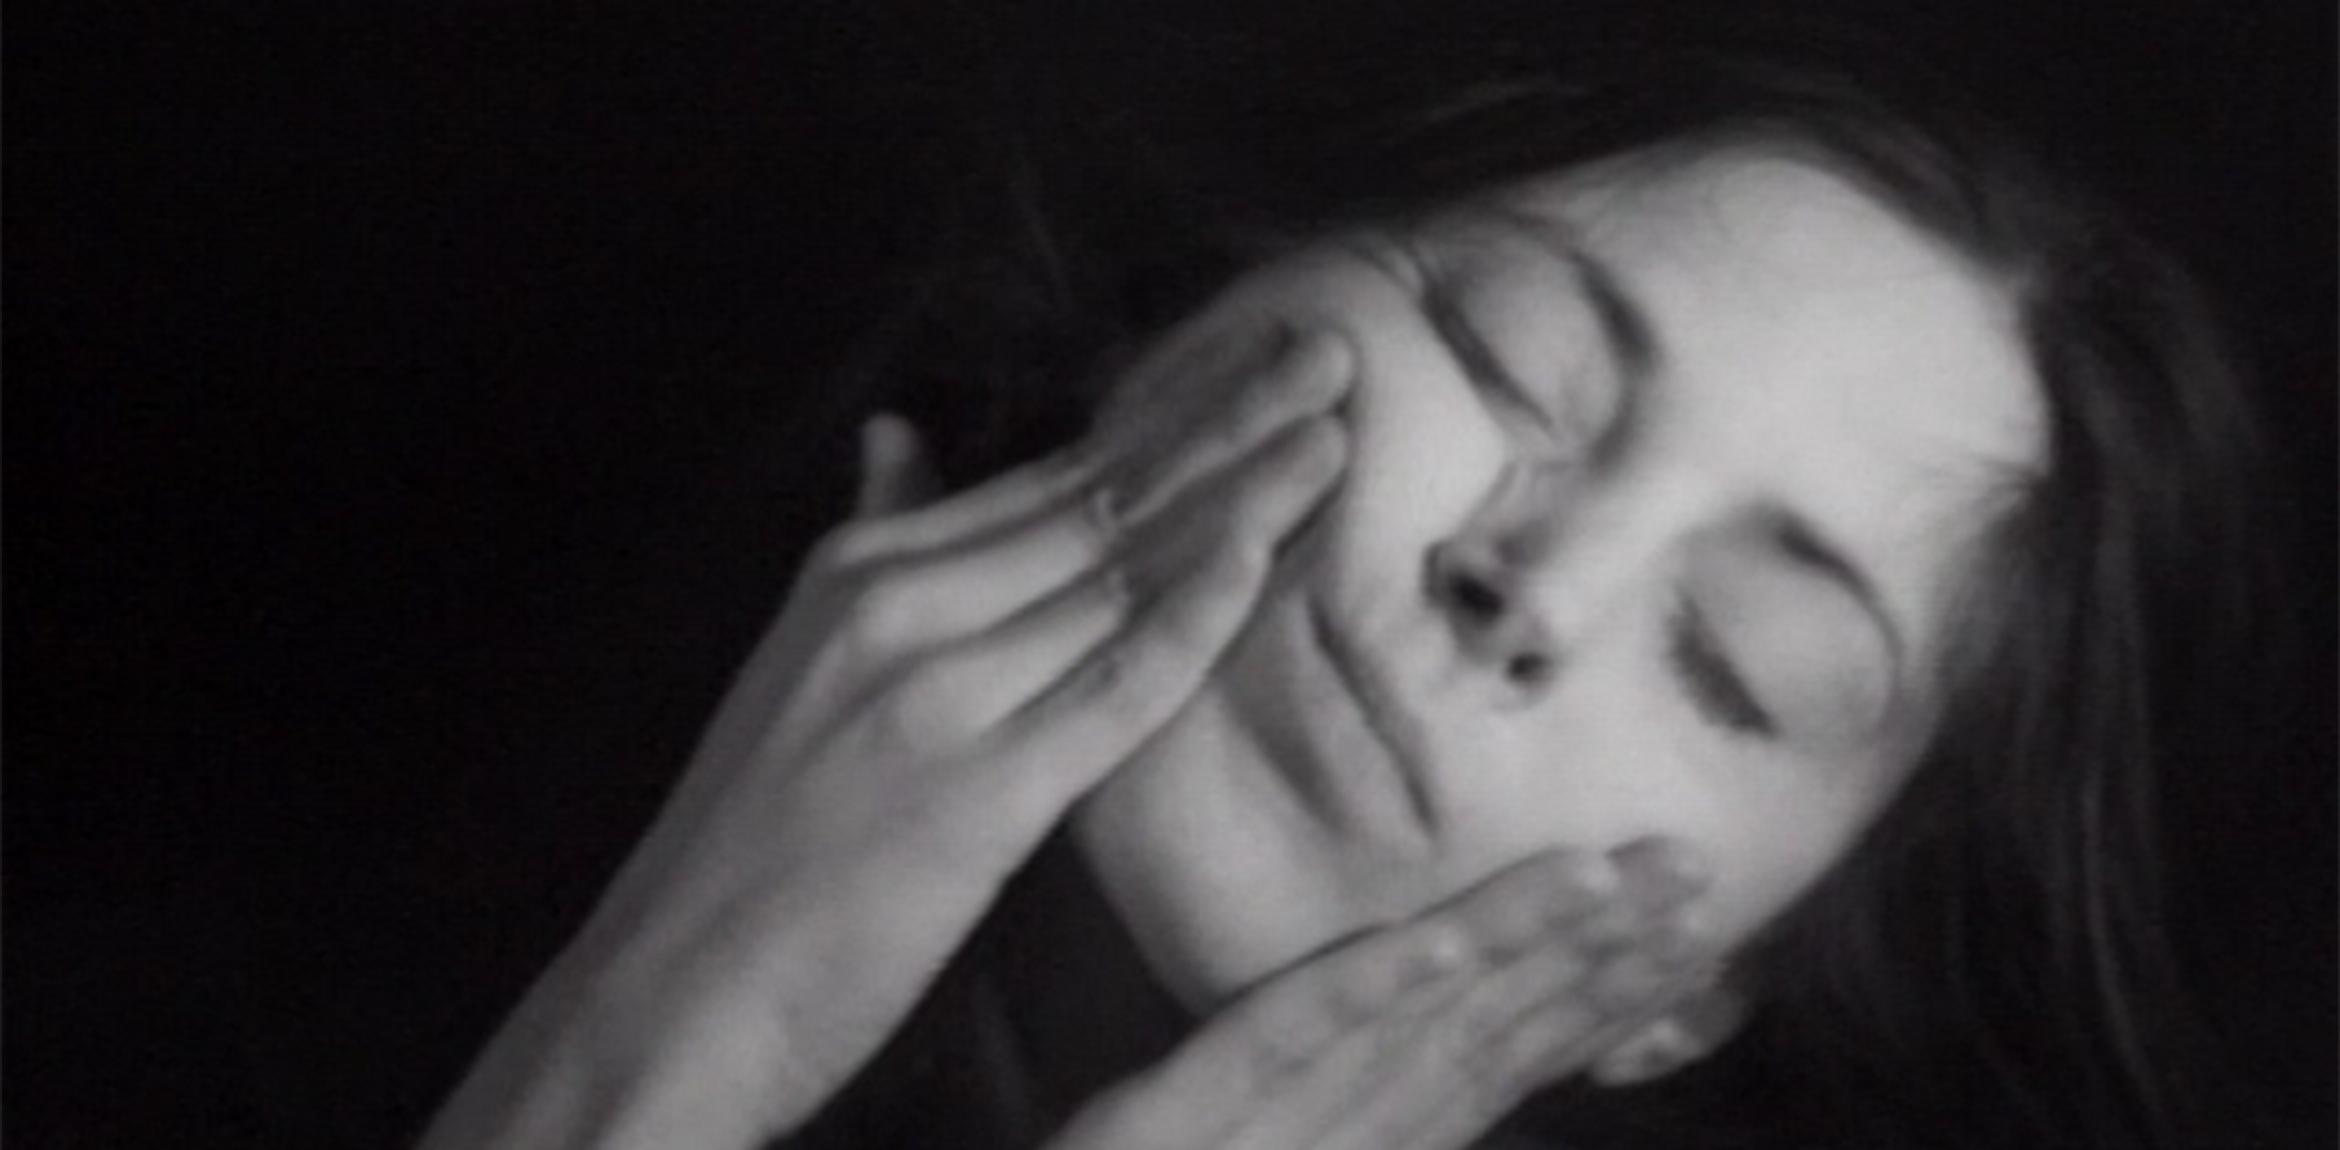 Film still from Hannah Wilke's "Gestures" (1974) in which the artist is shown rubbing her face with her two hands